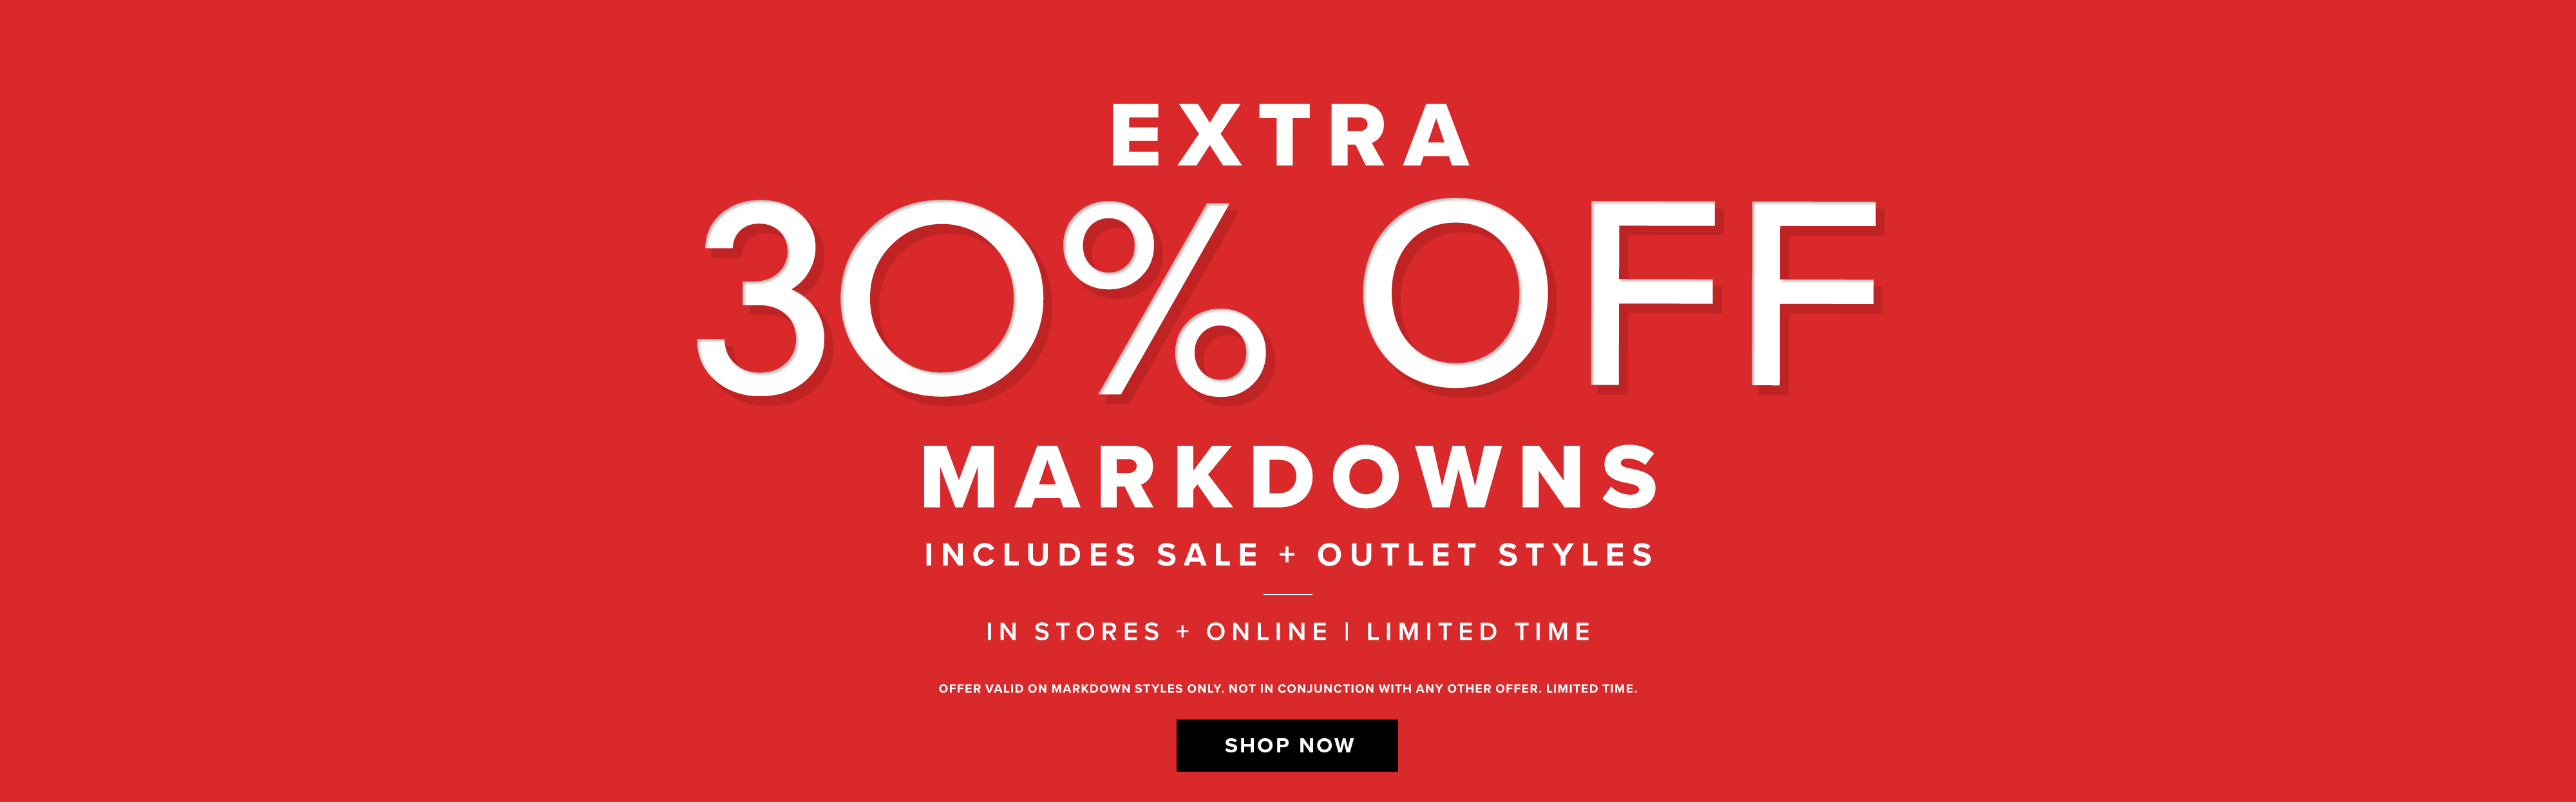 Save extra 30% OFF Markdowns